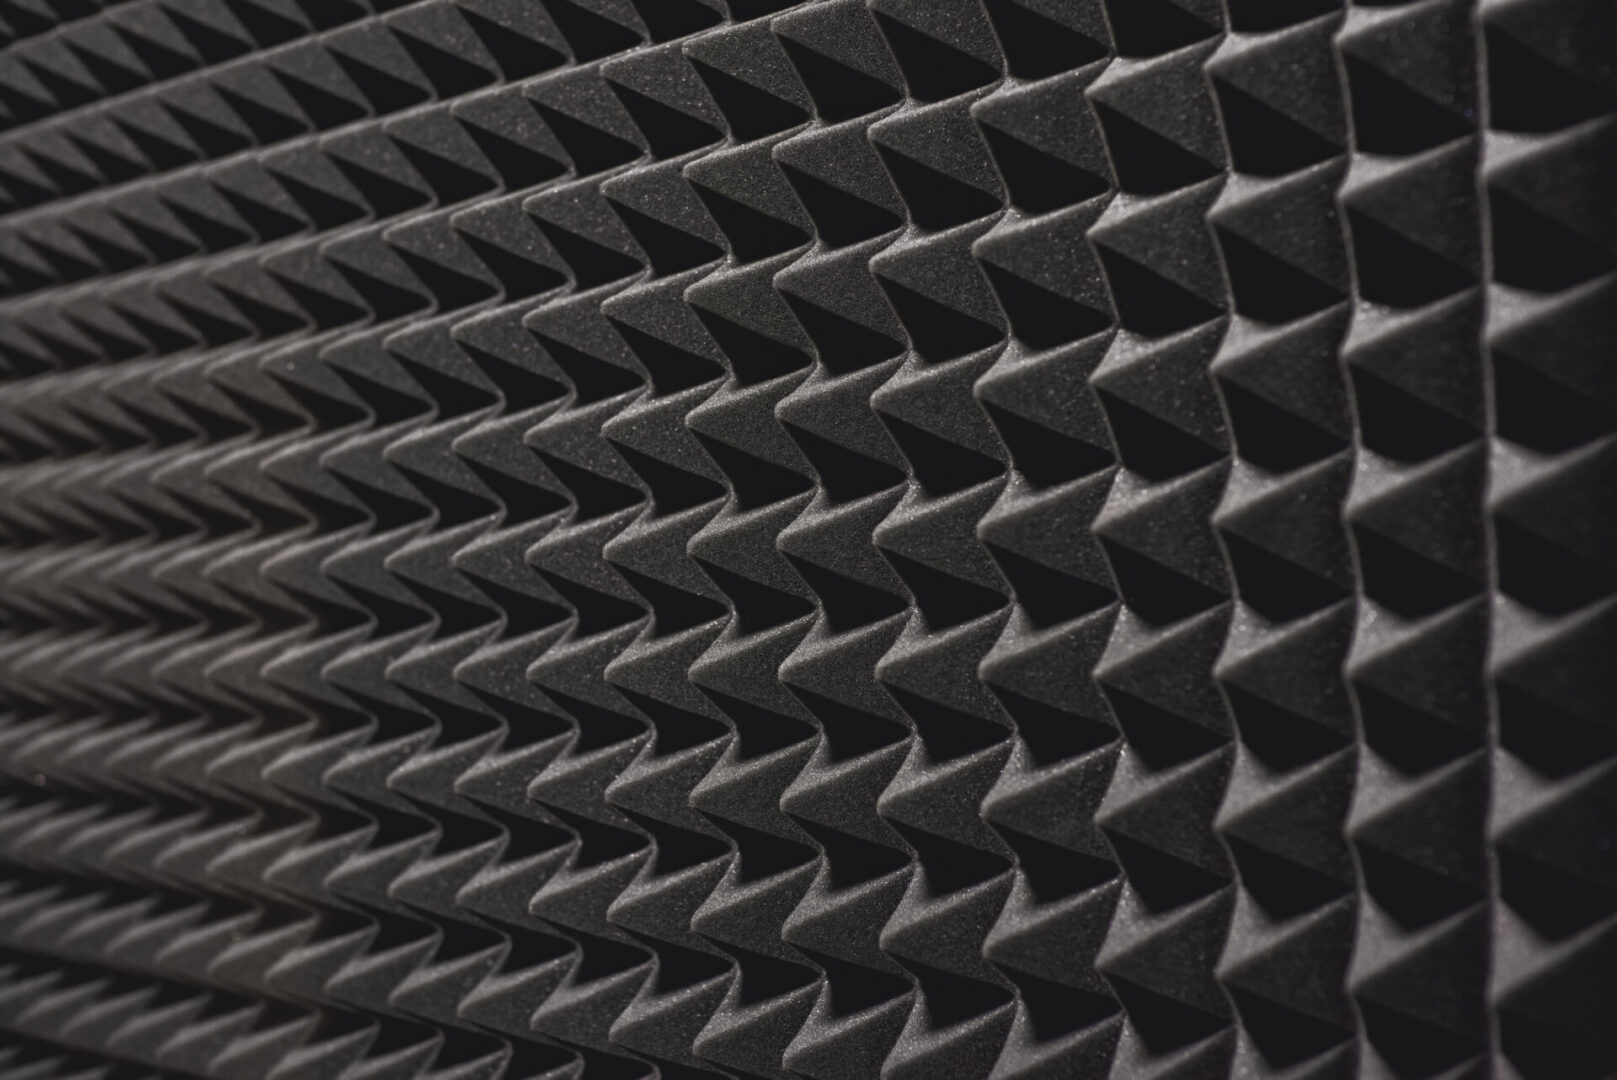 A close up of the sound proof wall